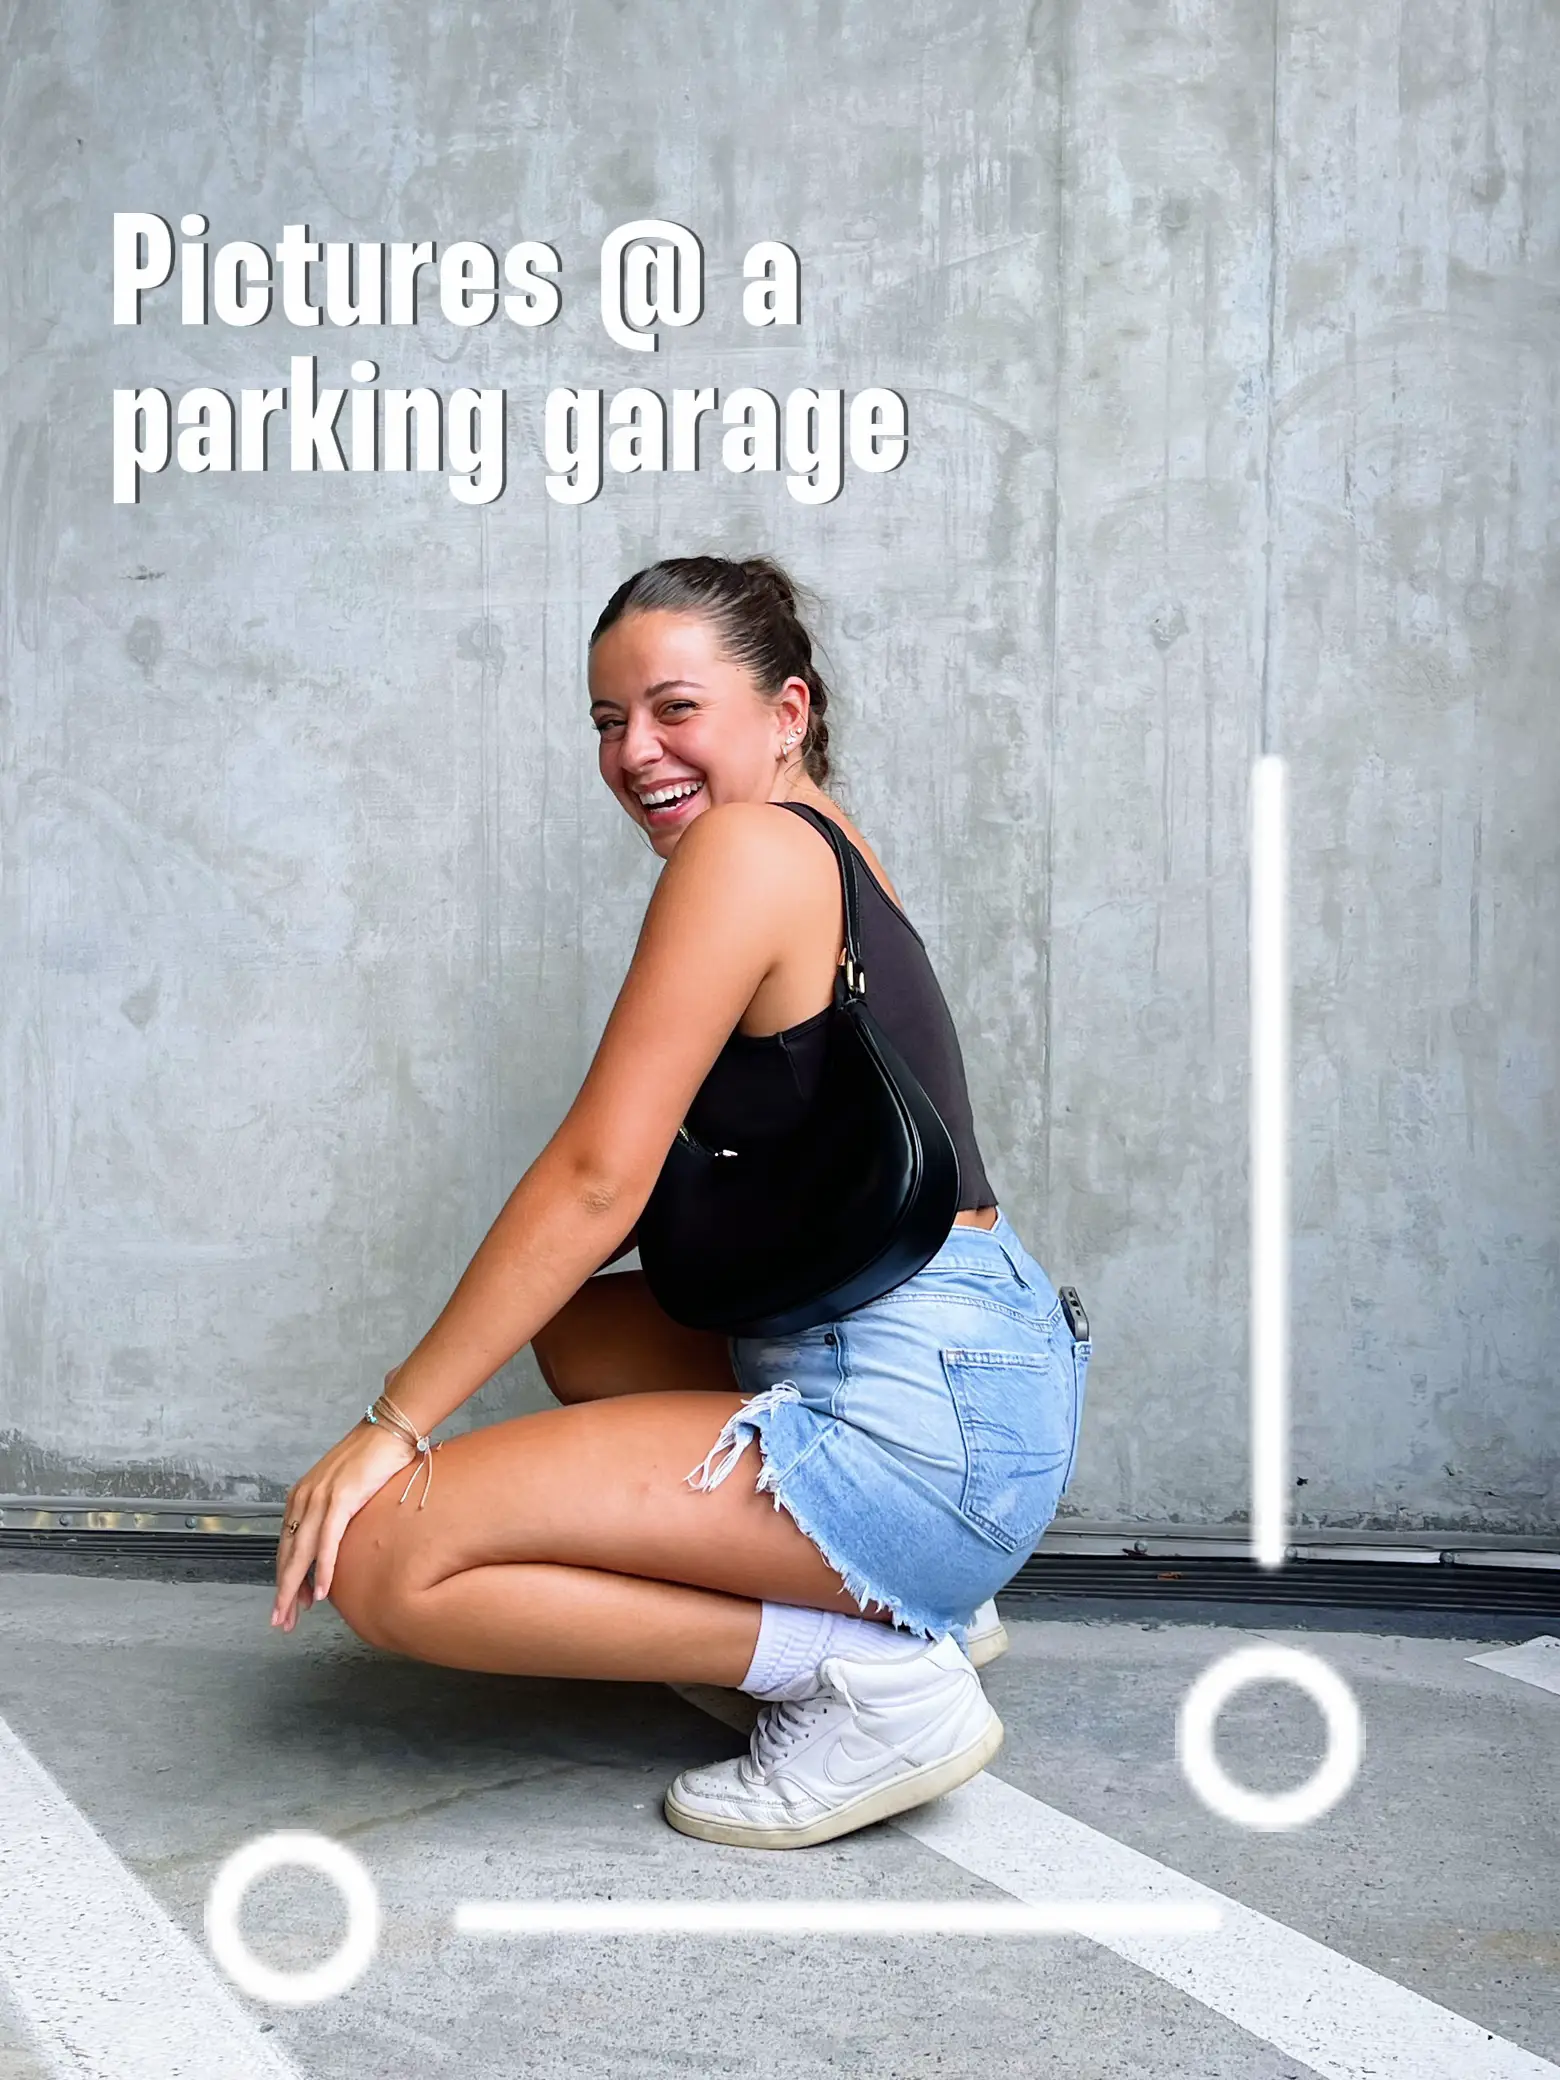 adam focht recommends Captions For Parking Garage Pictures